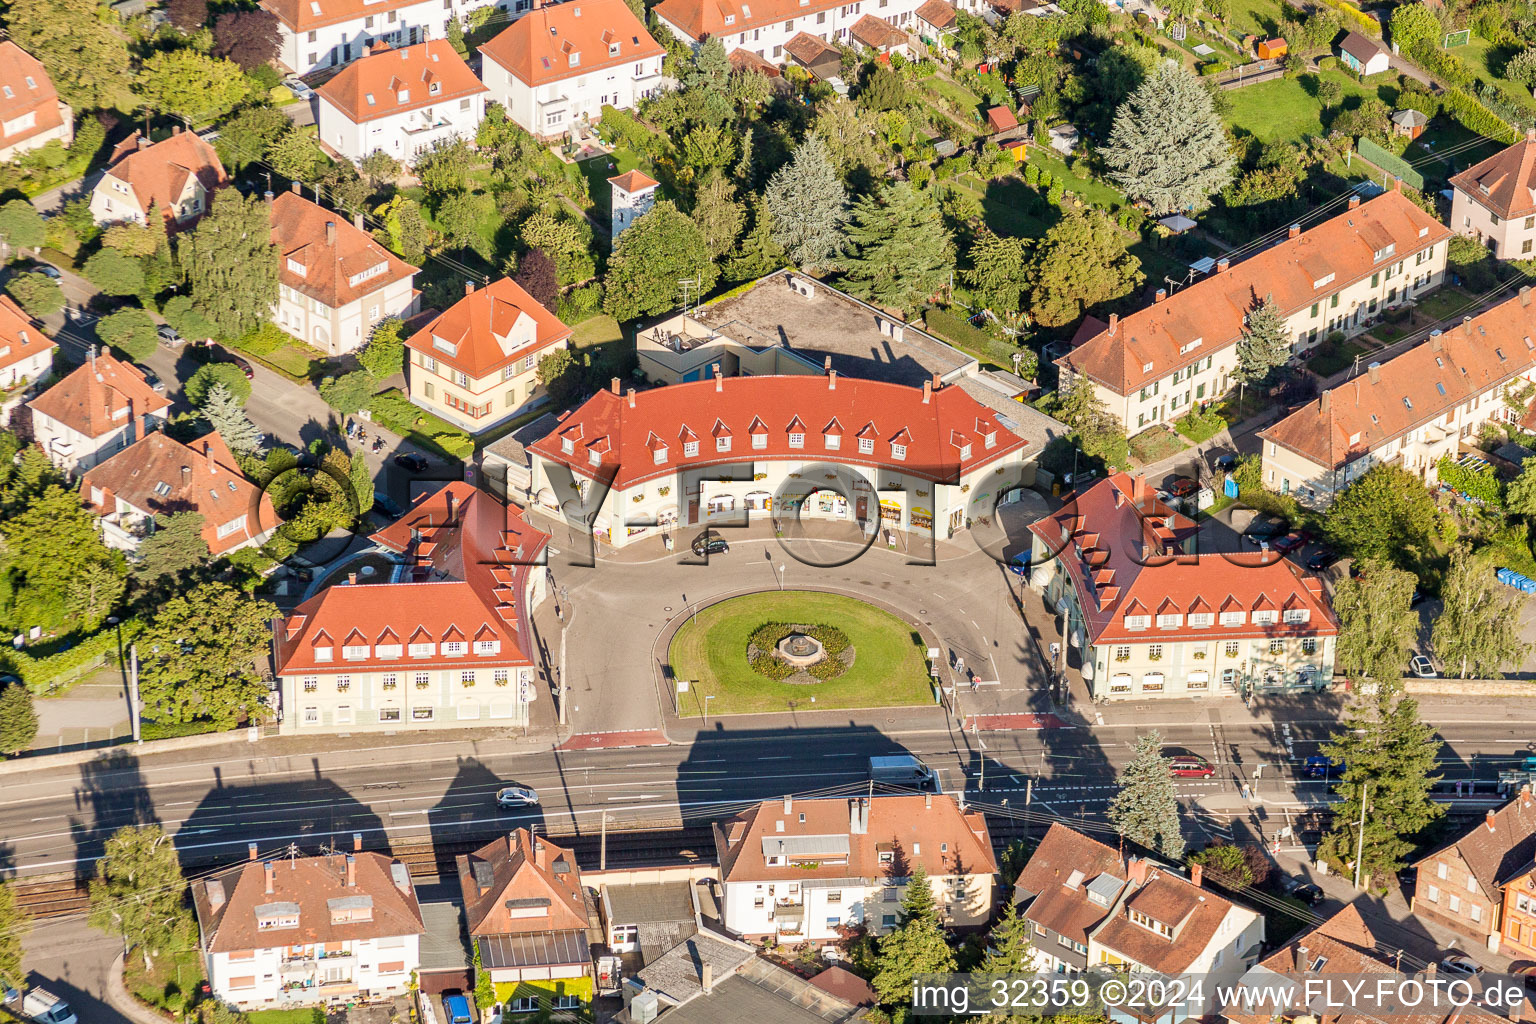 Aerial view of Half-Circular Place Ostendorfplatz in the district Rueppurr in Karlsruhe in the state Baden-Wurttemberg, Germany